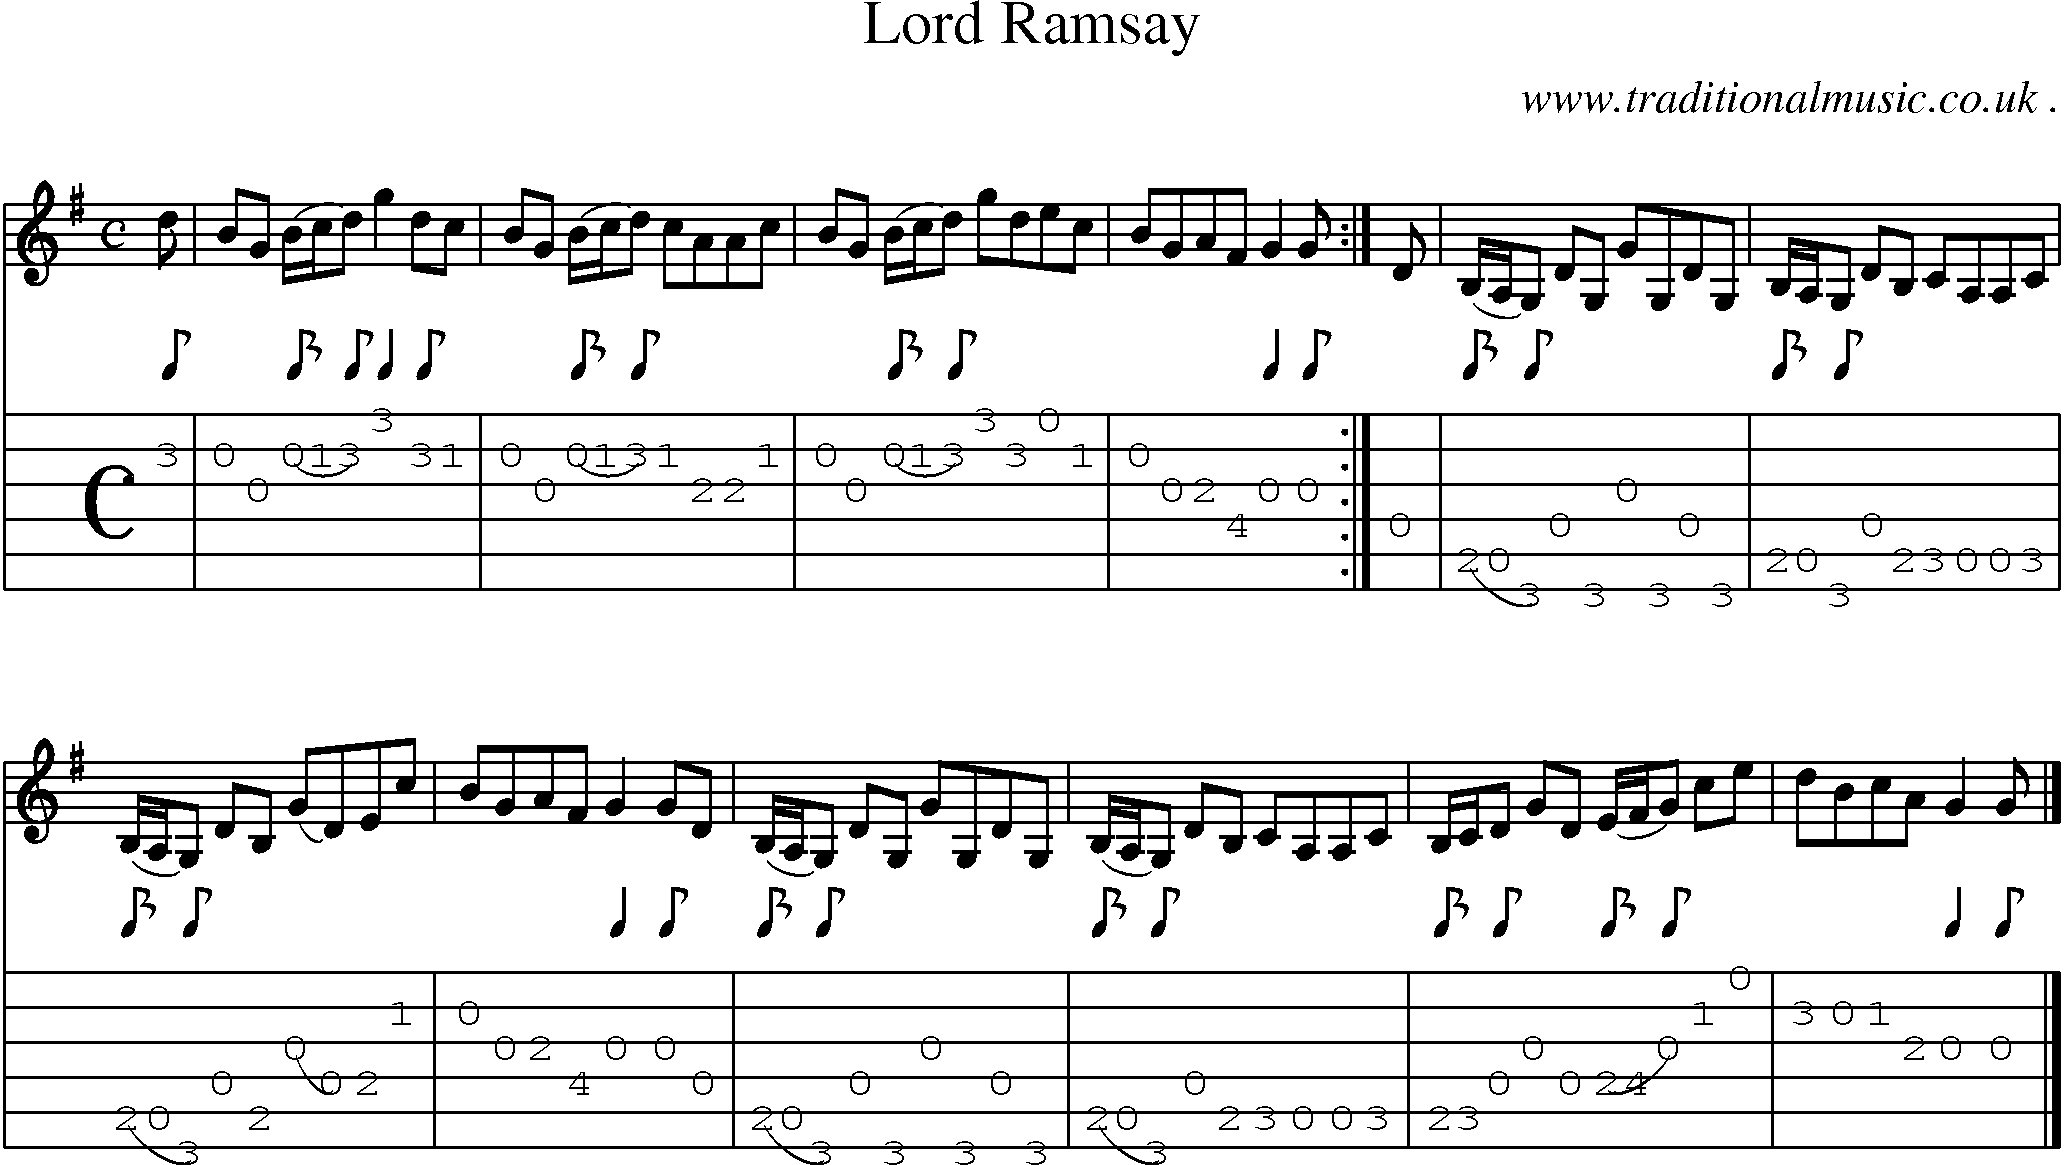 Sheet-music  score, Chords and Guitar Tabs for Lord Ramsay